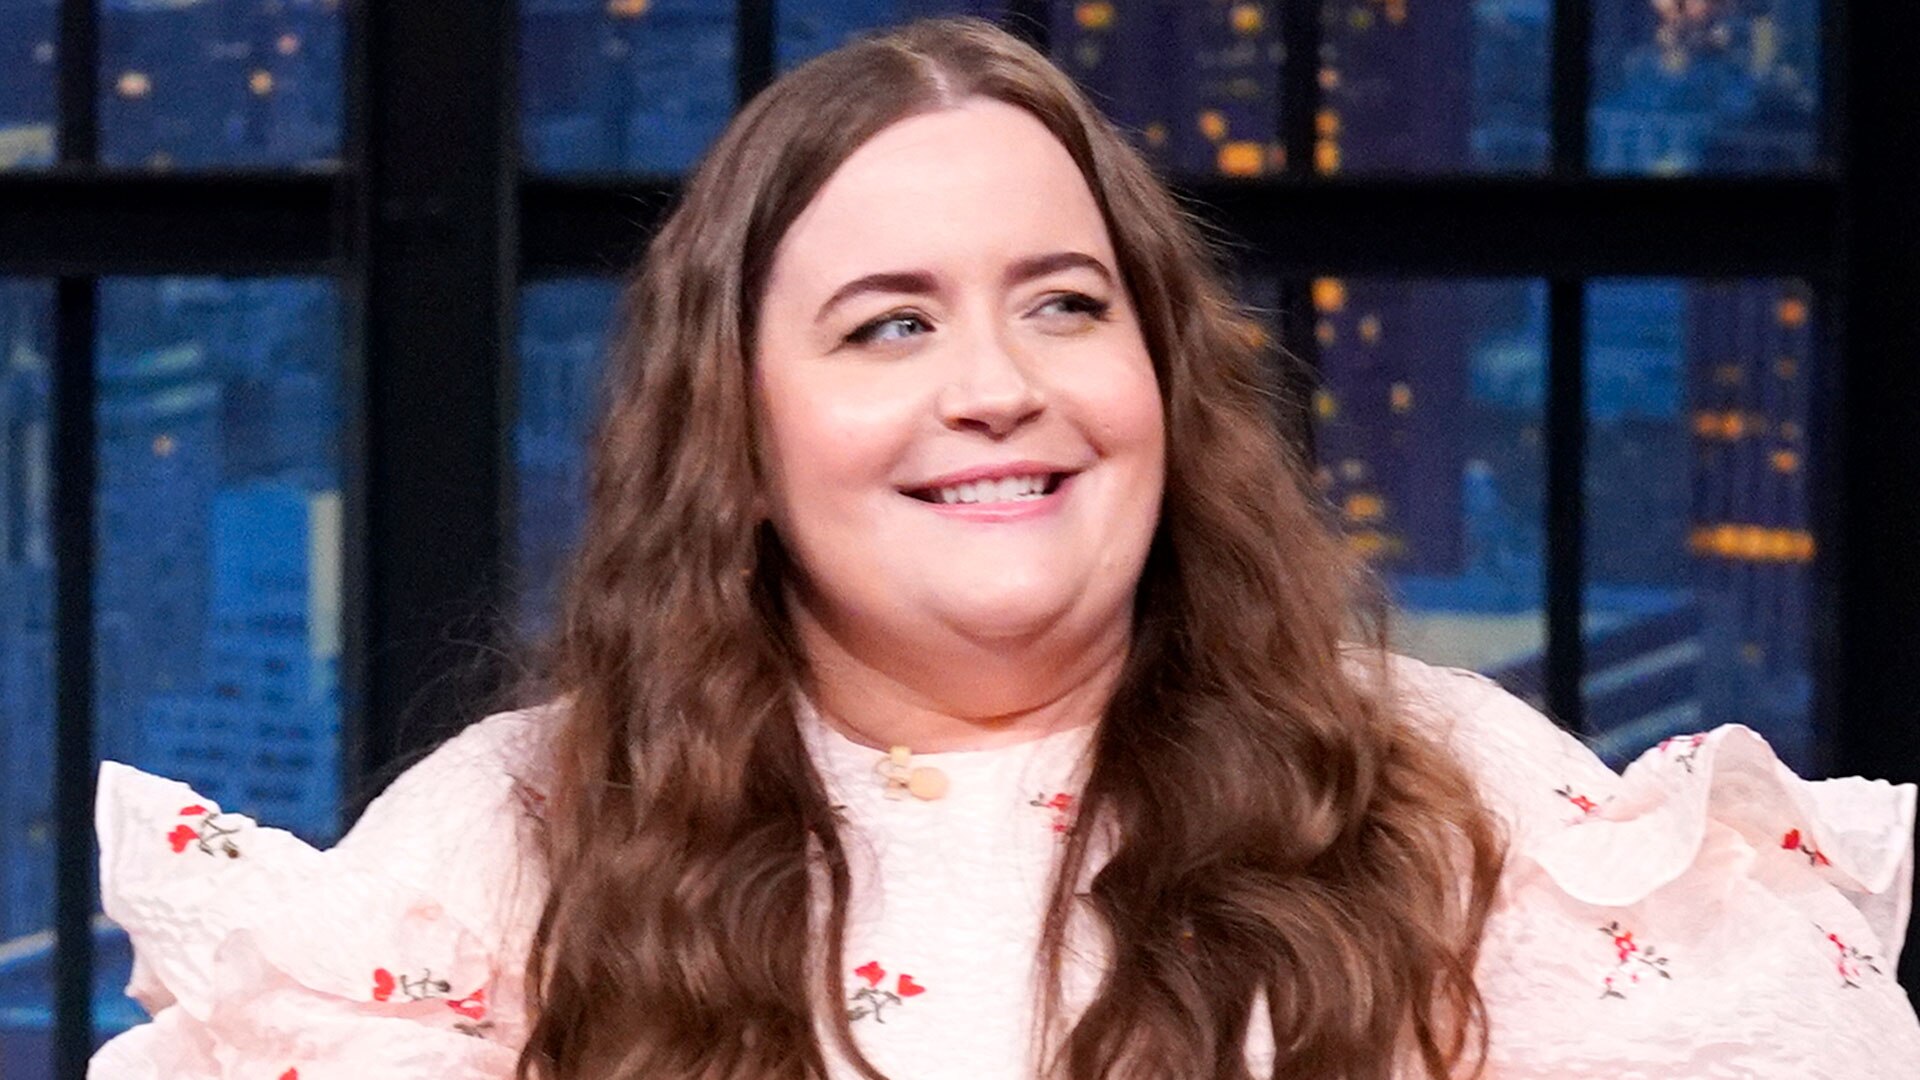 Watch Late Night With Seth Meyers Highlight A Cancelled Snl Party Left Aidy Bryant With An